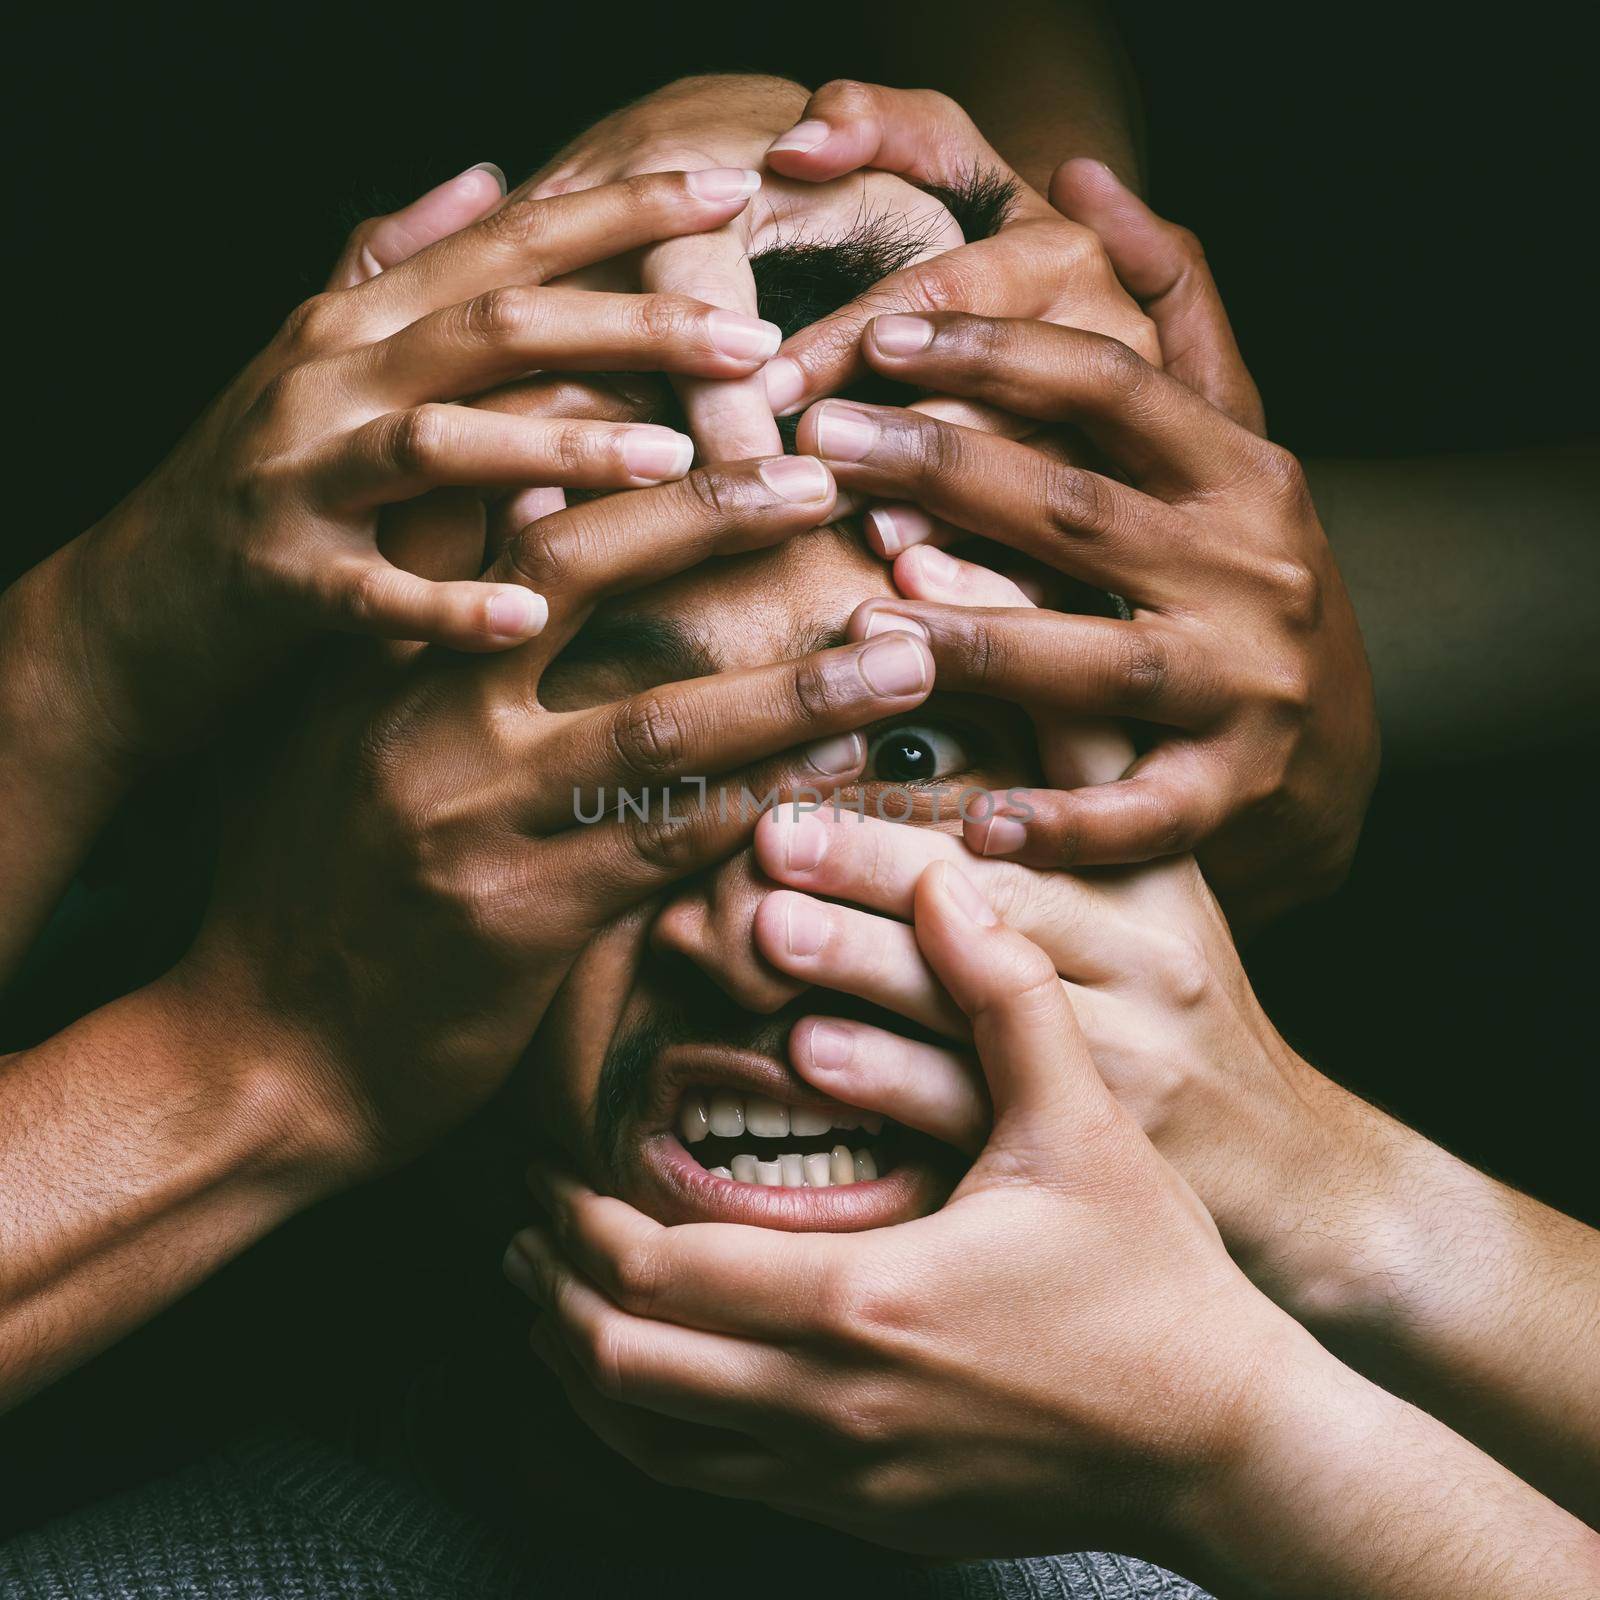 How do you wake from a nightmare when you arent asleep. Shot of hands grabbing a young mans face against a dark background. by YuriArcurs